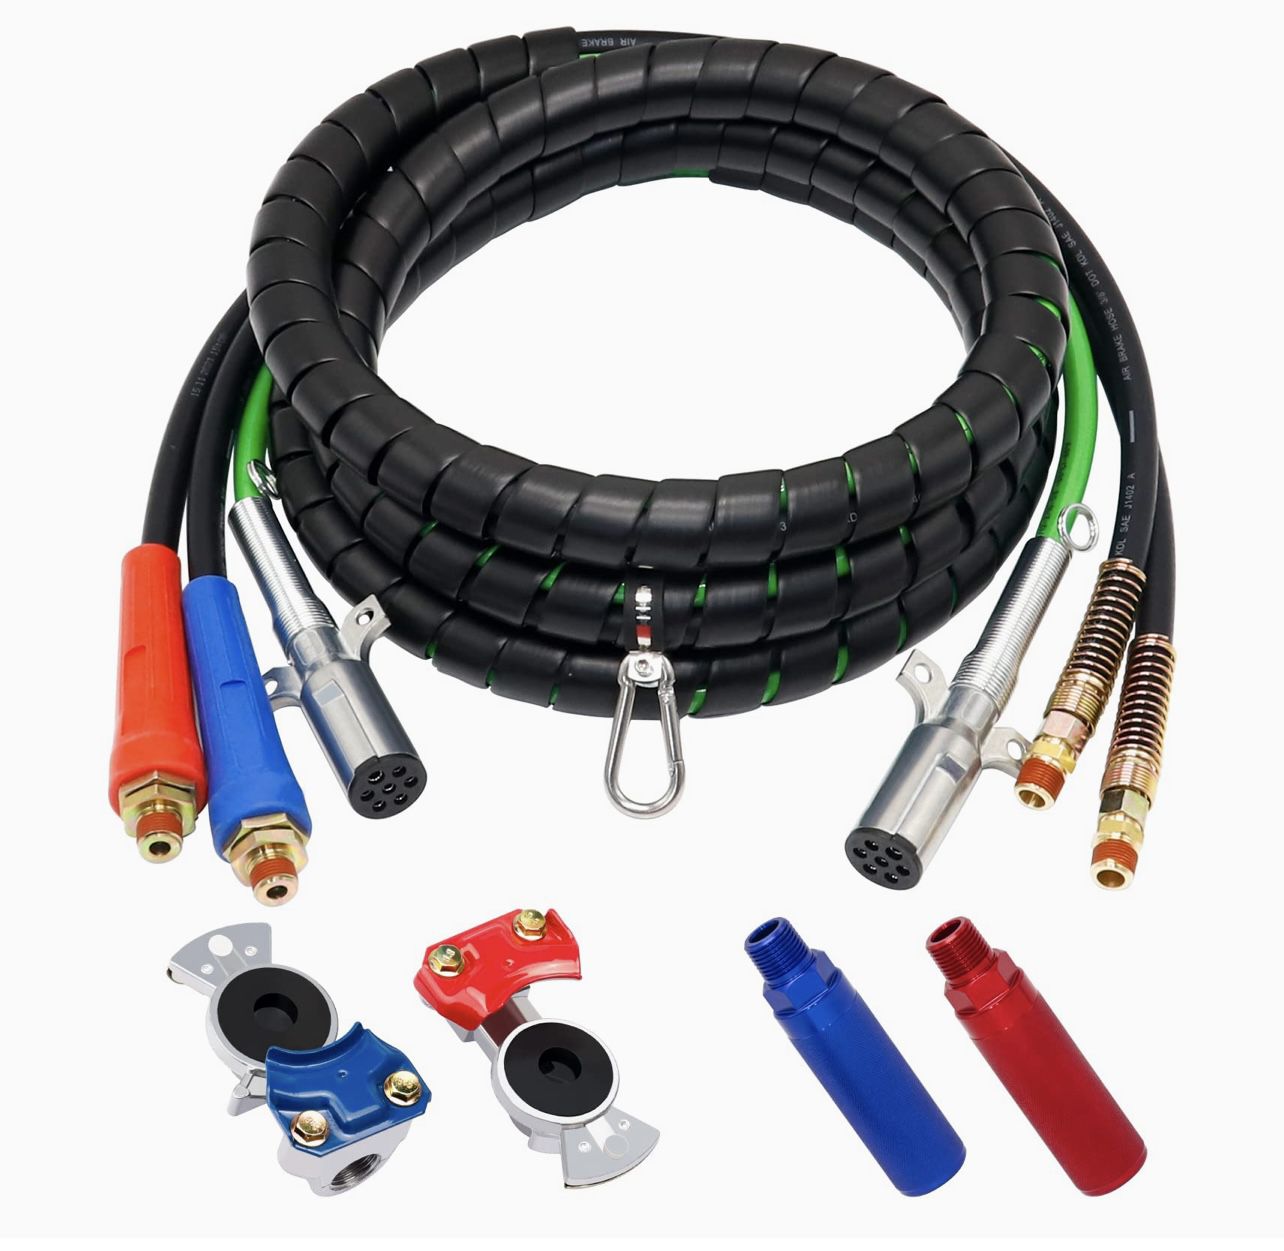 KOOTANS 15Ft 3 in 1 ABS 7 Way Electrical Cable